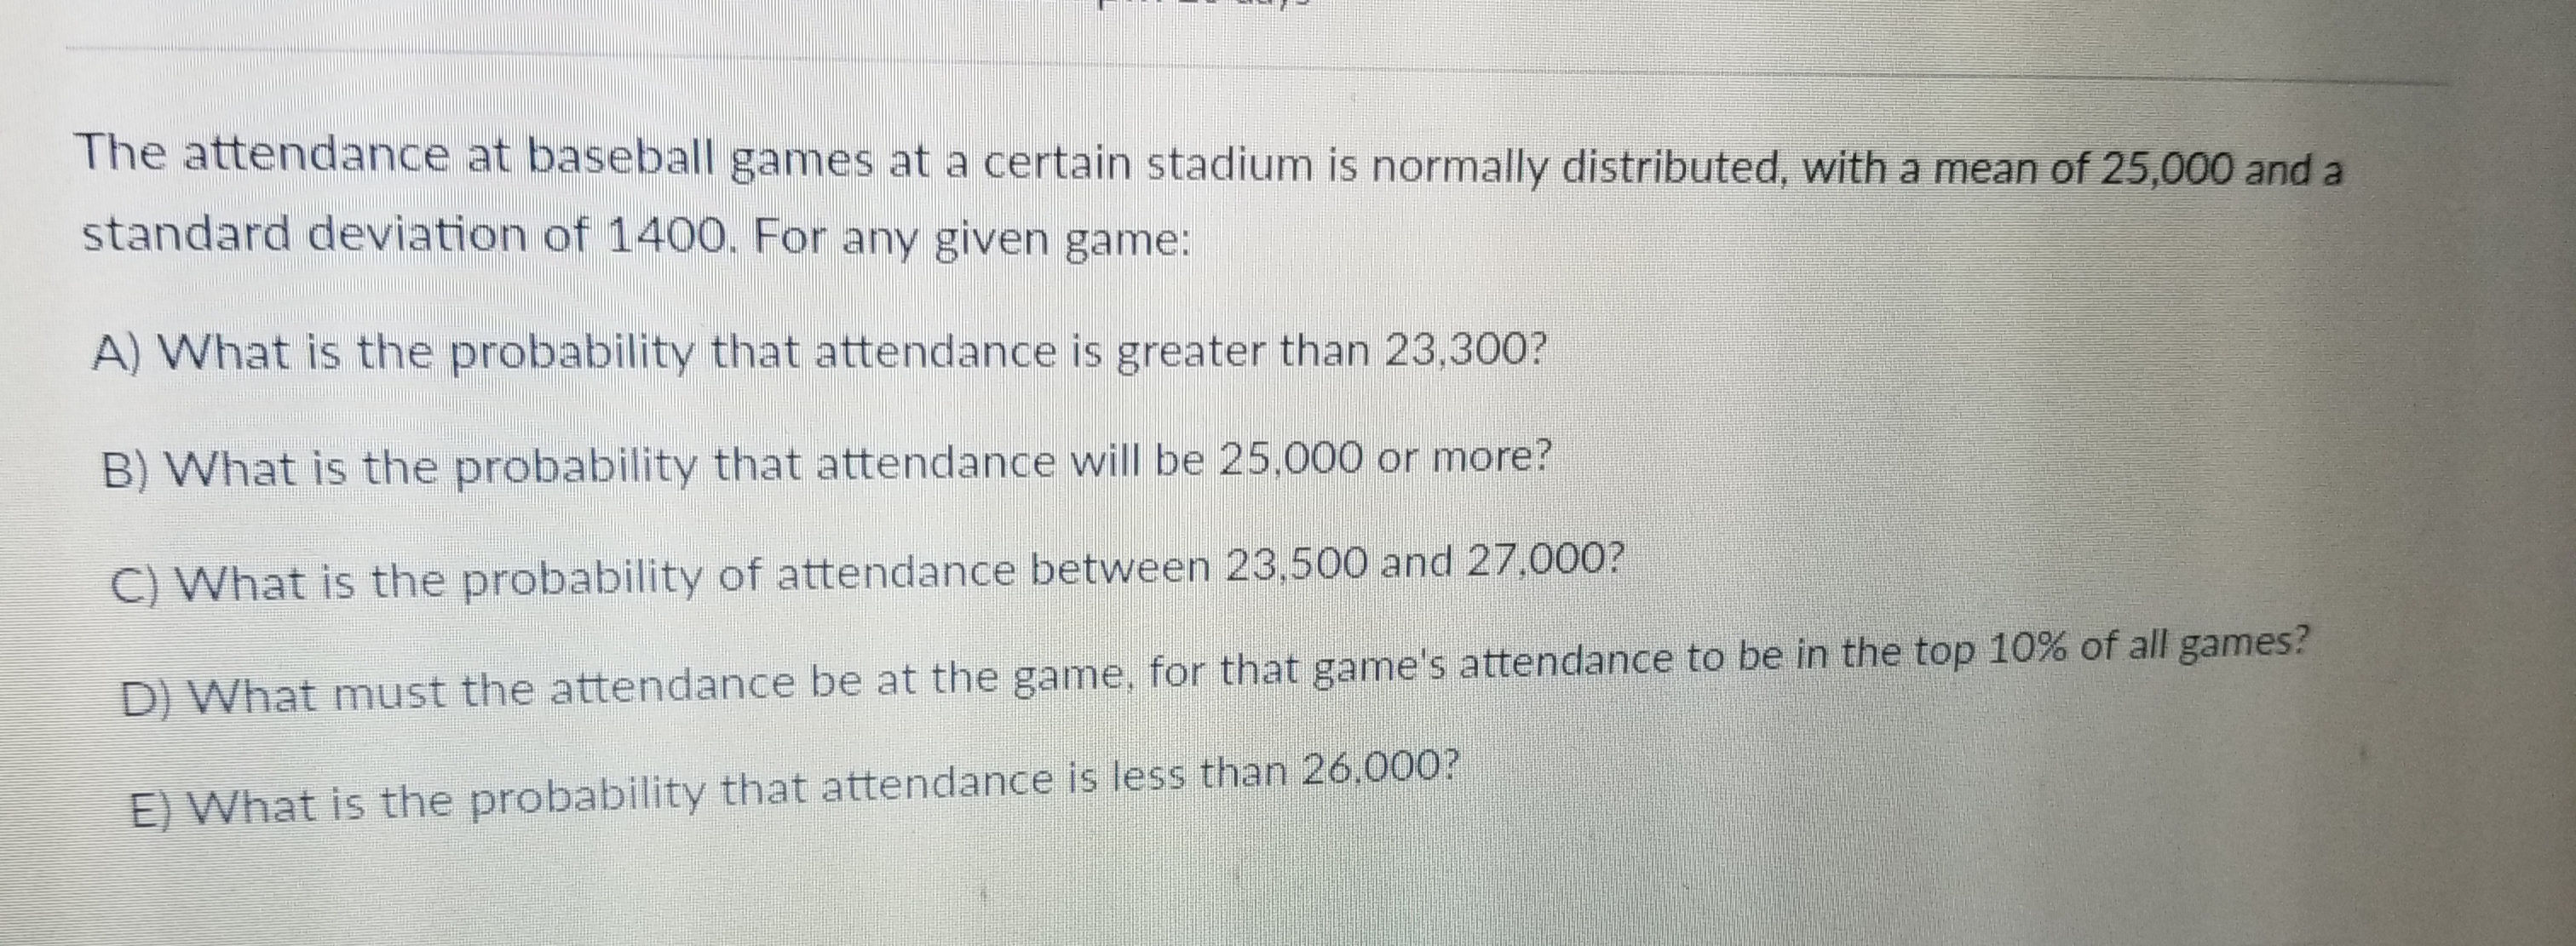 The attendance at baseball games at a certain stadium is normally distributed, with a mean of 25,000 and a
standard deviation of 1400. For any given game:
A) What is the probability that attendance is greater than 23,300?
B) What is the probability that attendance will be 25.000 or more?
C) W
D) What must the attendance be at the game, for that game's attendance to be in the top 10% of all games?
hat is the probability of attendance between 23,500 and 27.000?
E) What is the probability that attendance is less than 26.000?
